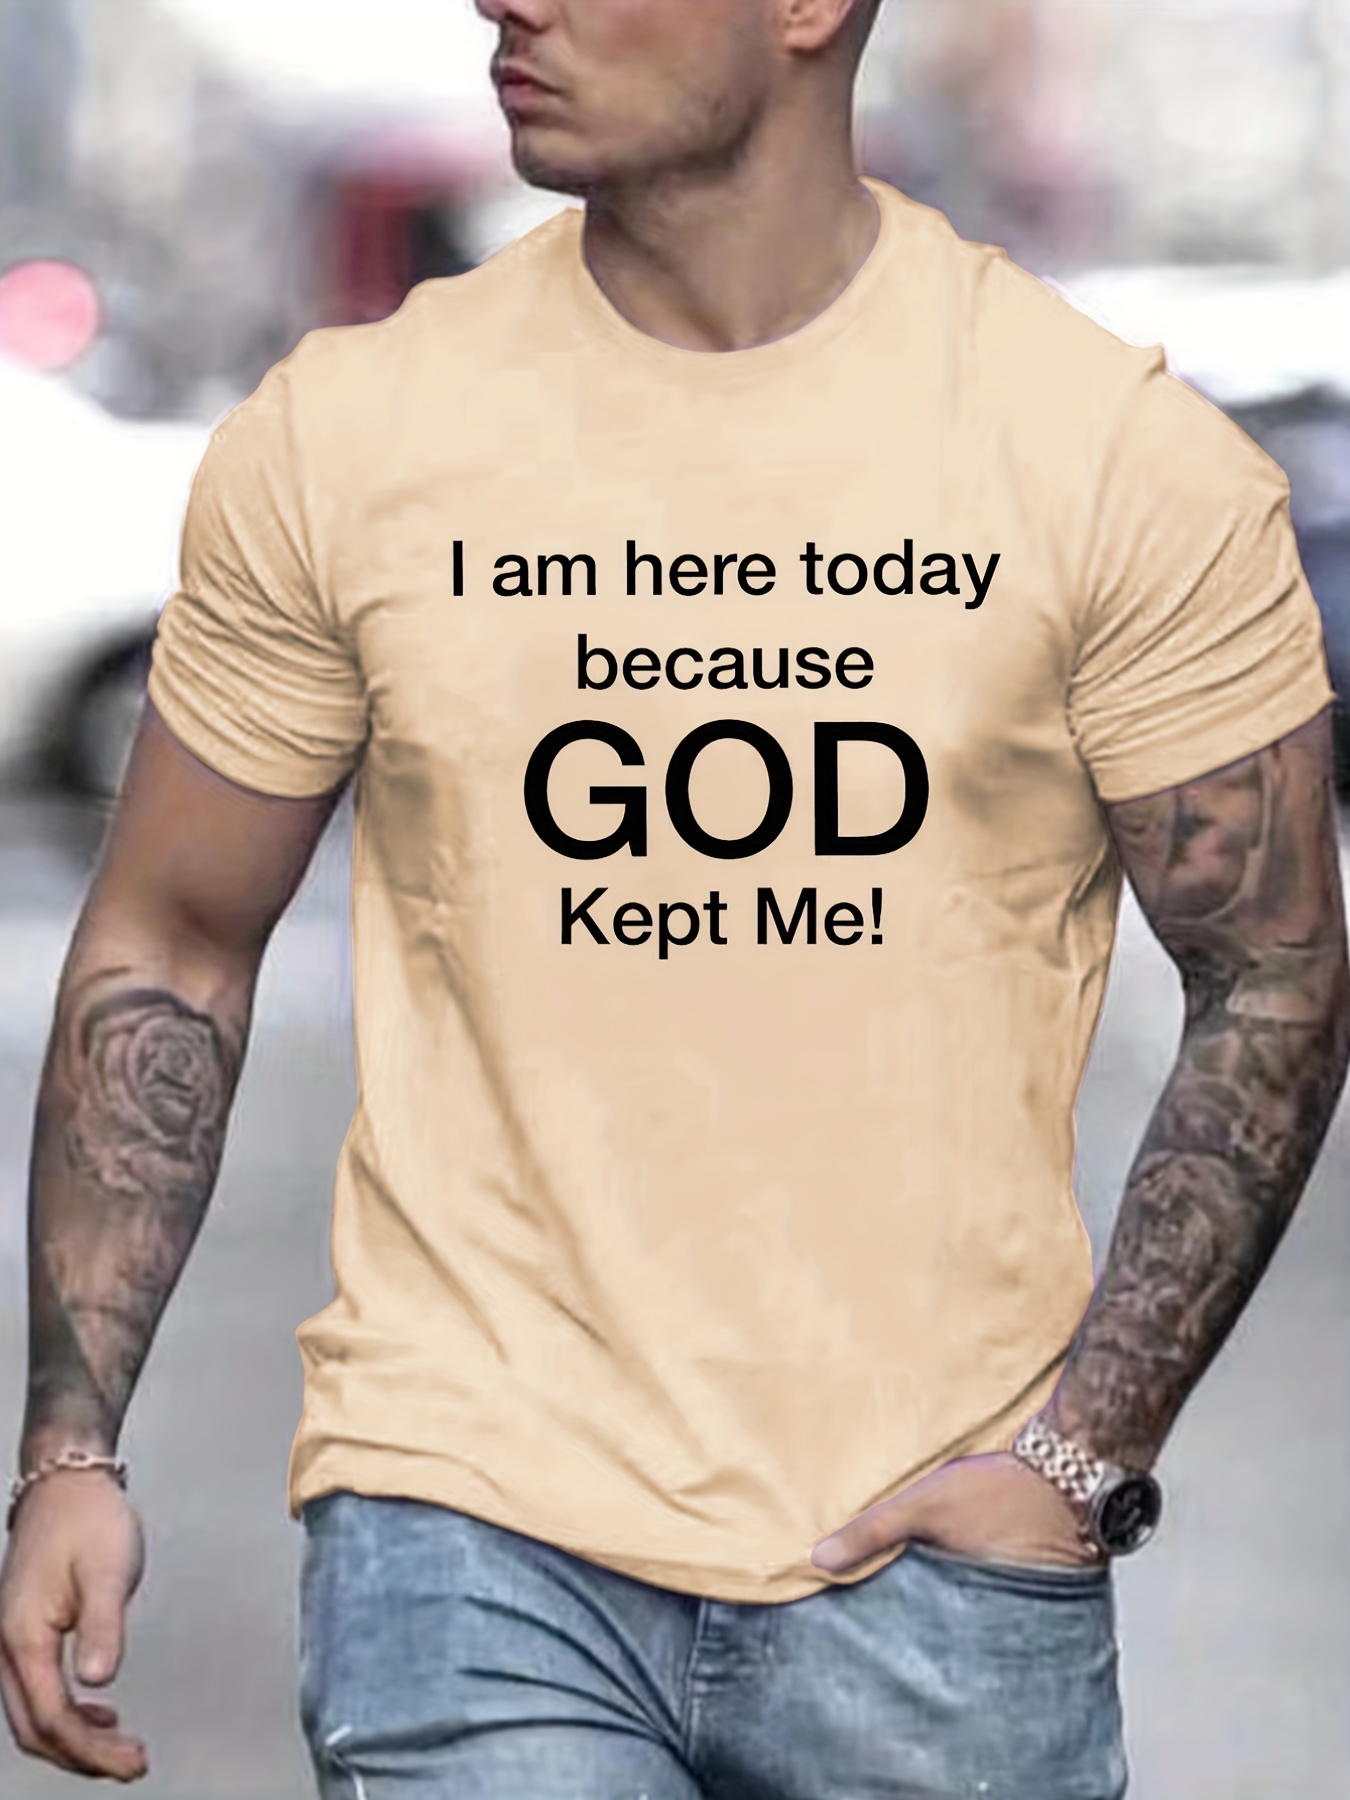 tees for men god kept me print t shirt casual short sleeve tshirt for summer spring fall tops as gifts details 42